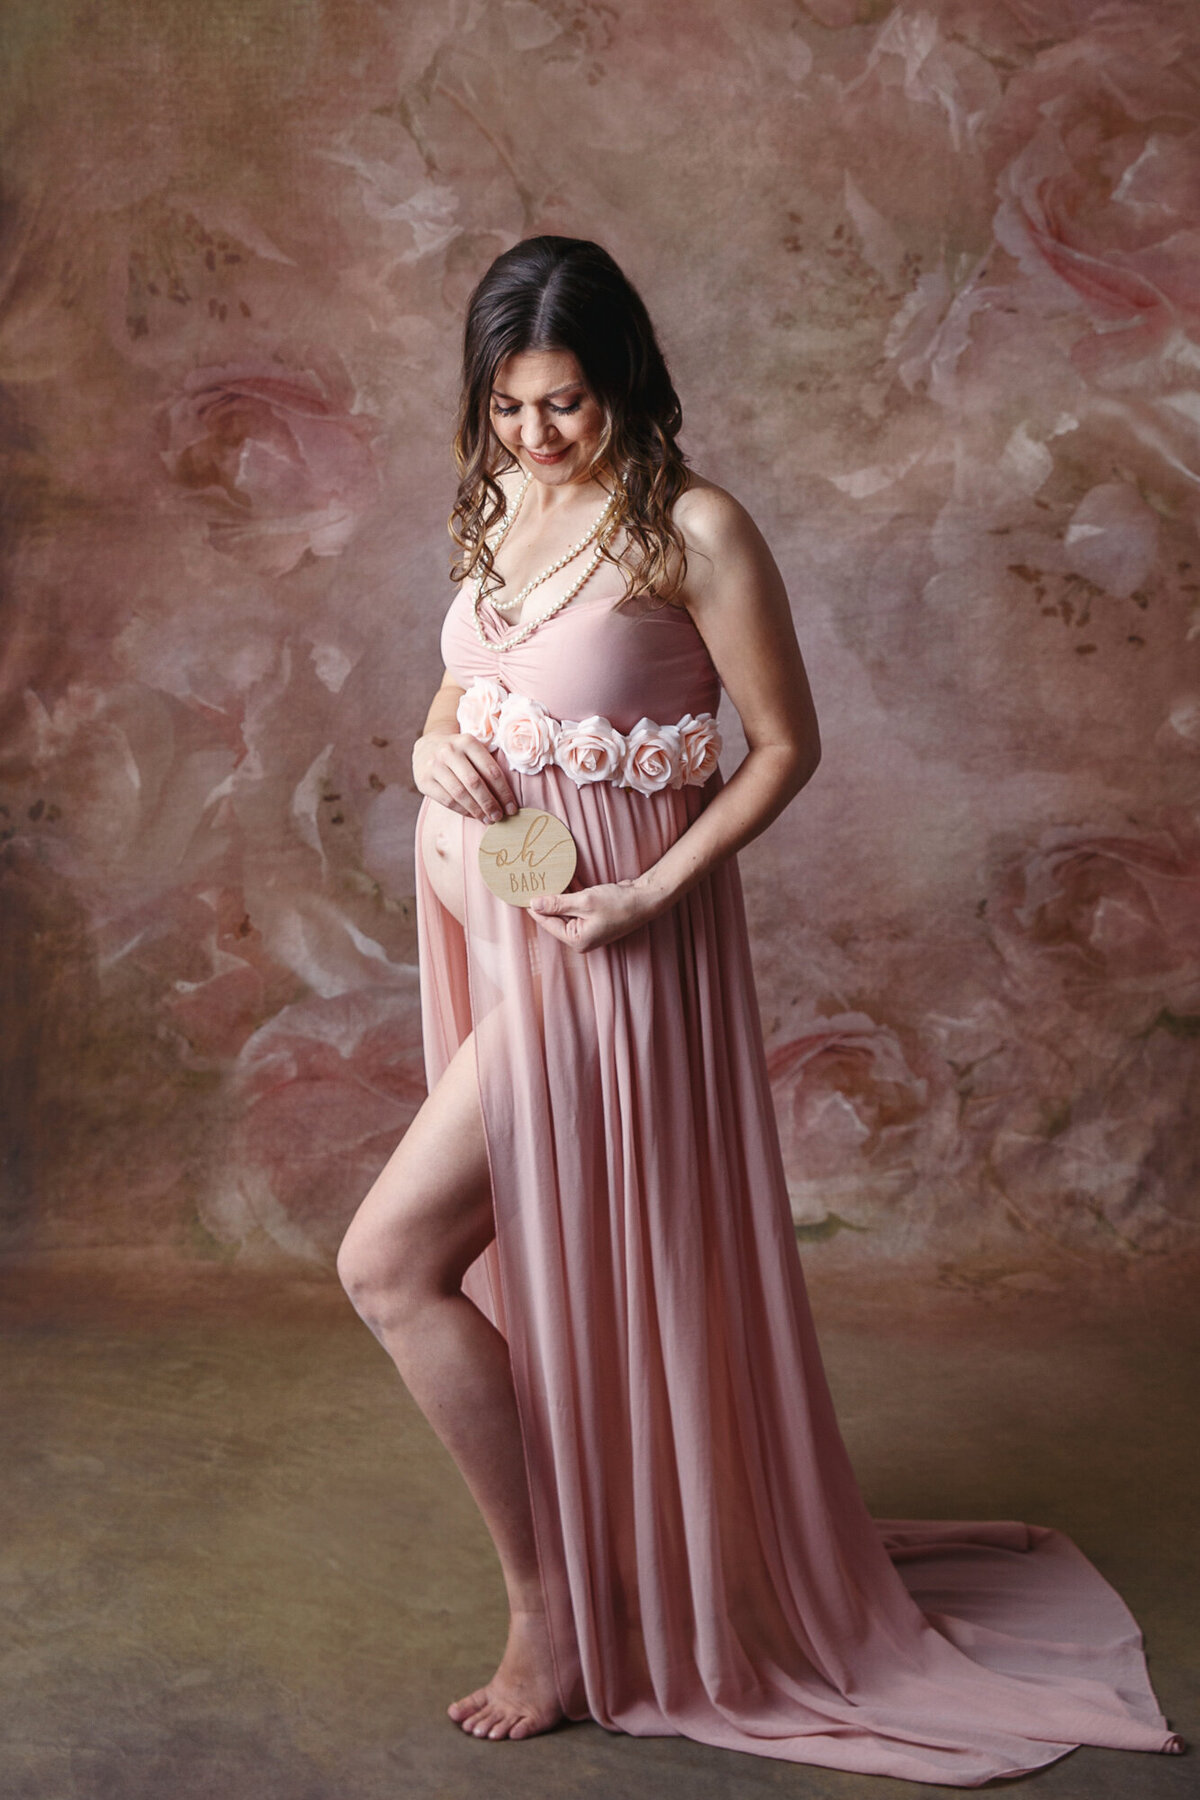 Full body portrait of a woman in a pink maternity dress holding a sign that says oh baby